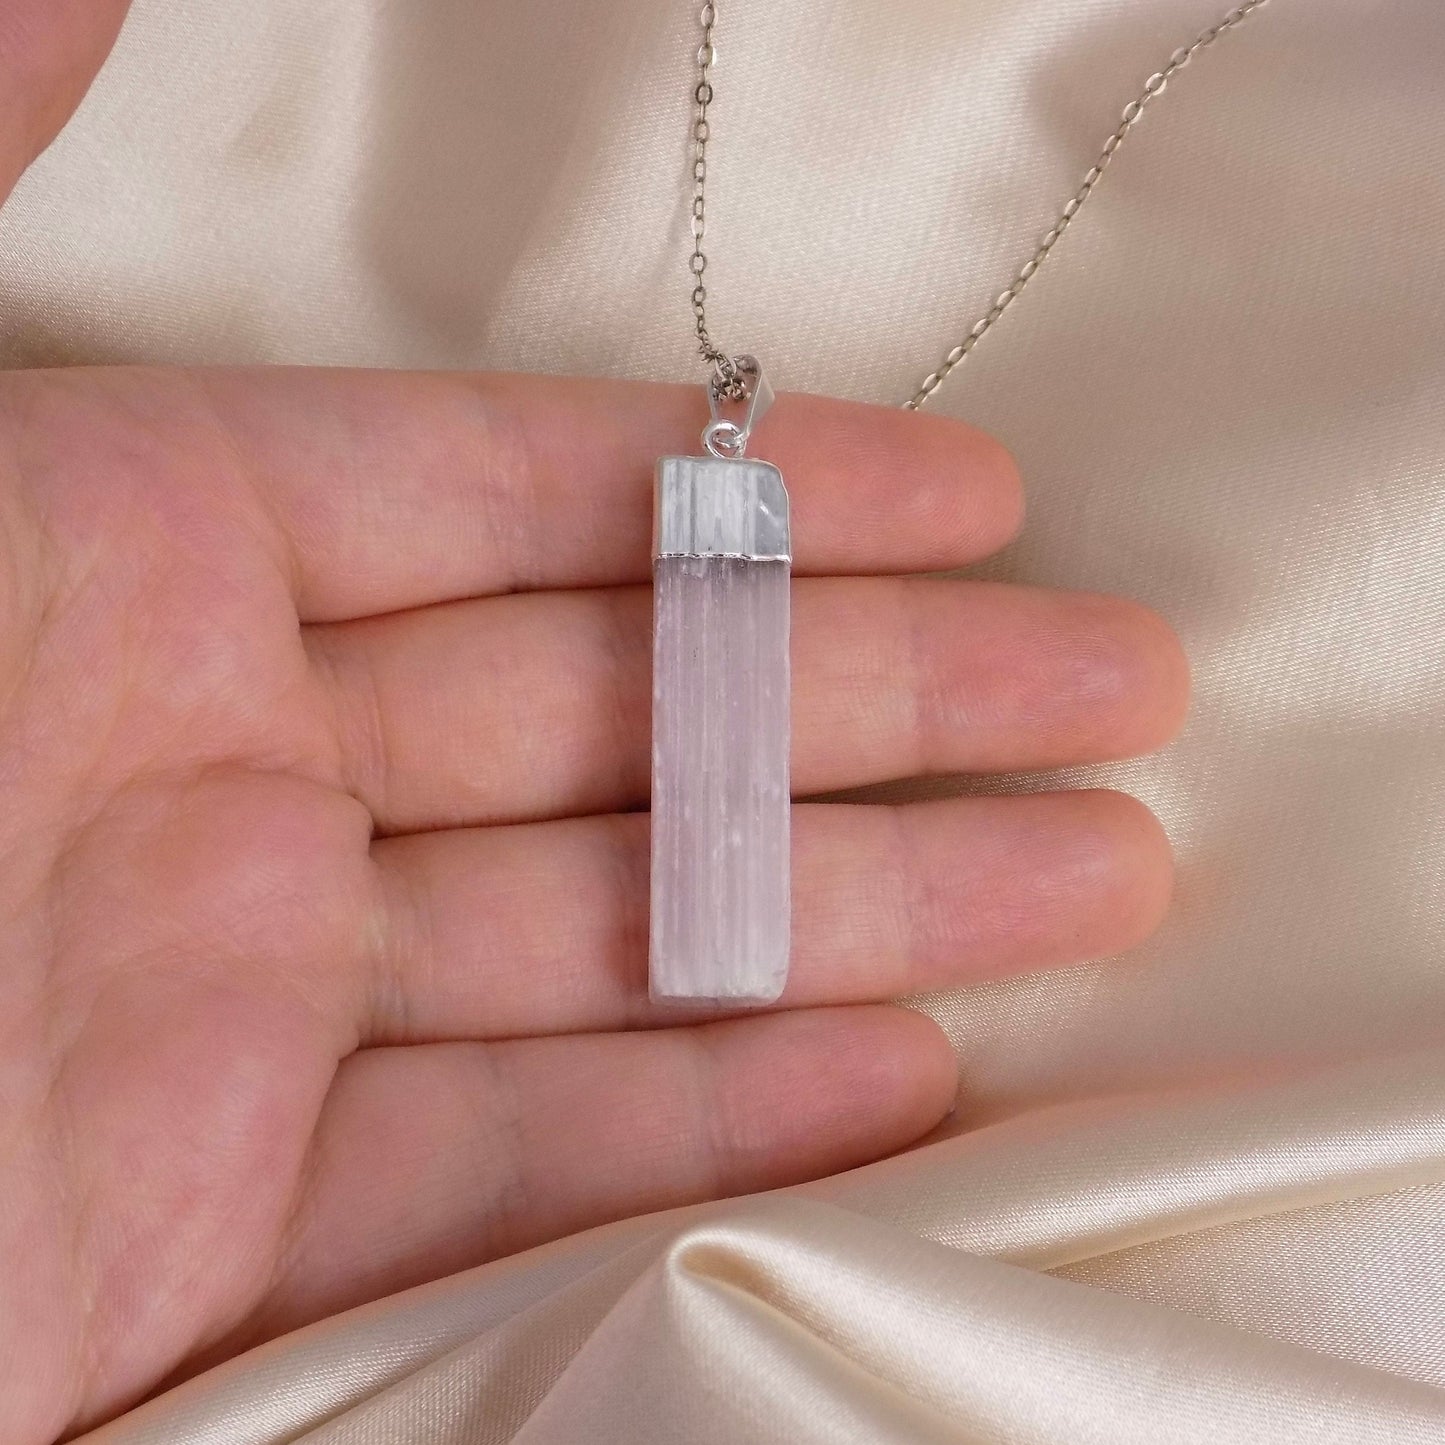 Pink Selenite Necklace Silver, Raw Selenite Natural Gemstone Pendant, Boho Cleansing Crystal Jewelry, G15-141